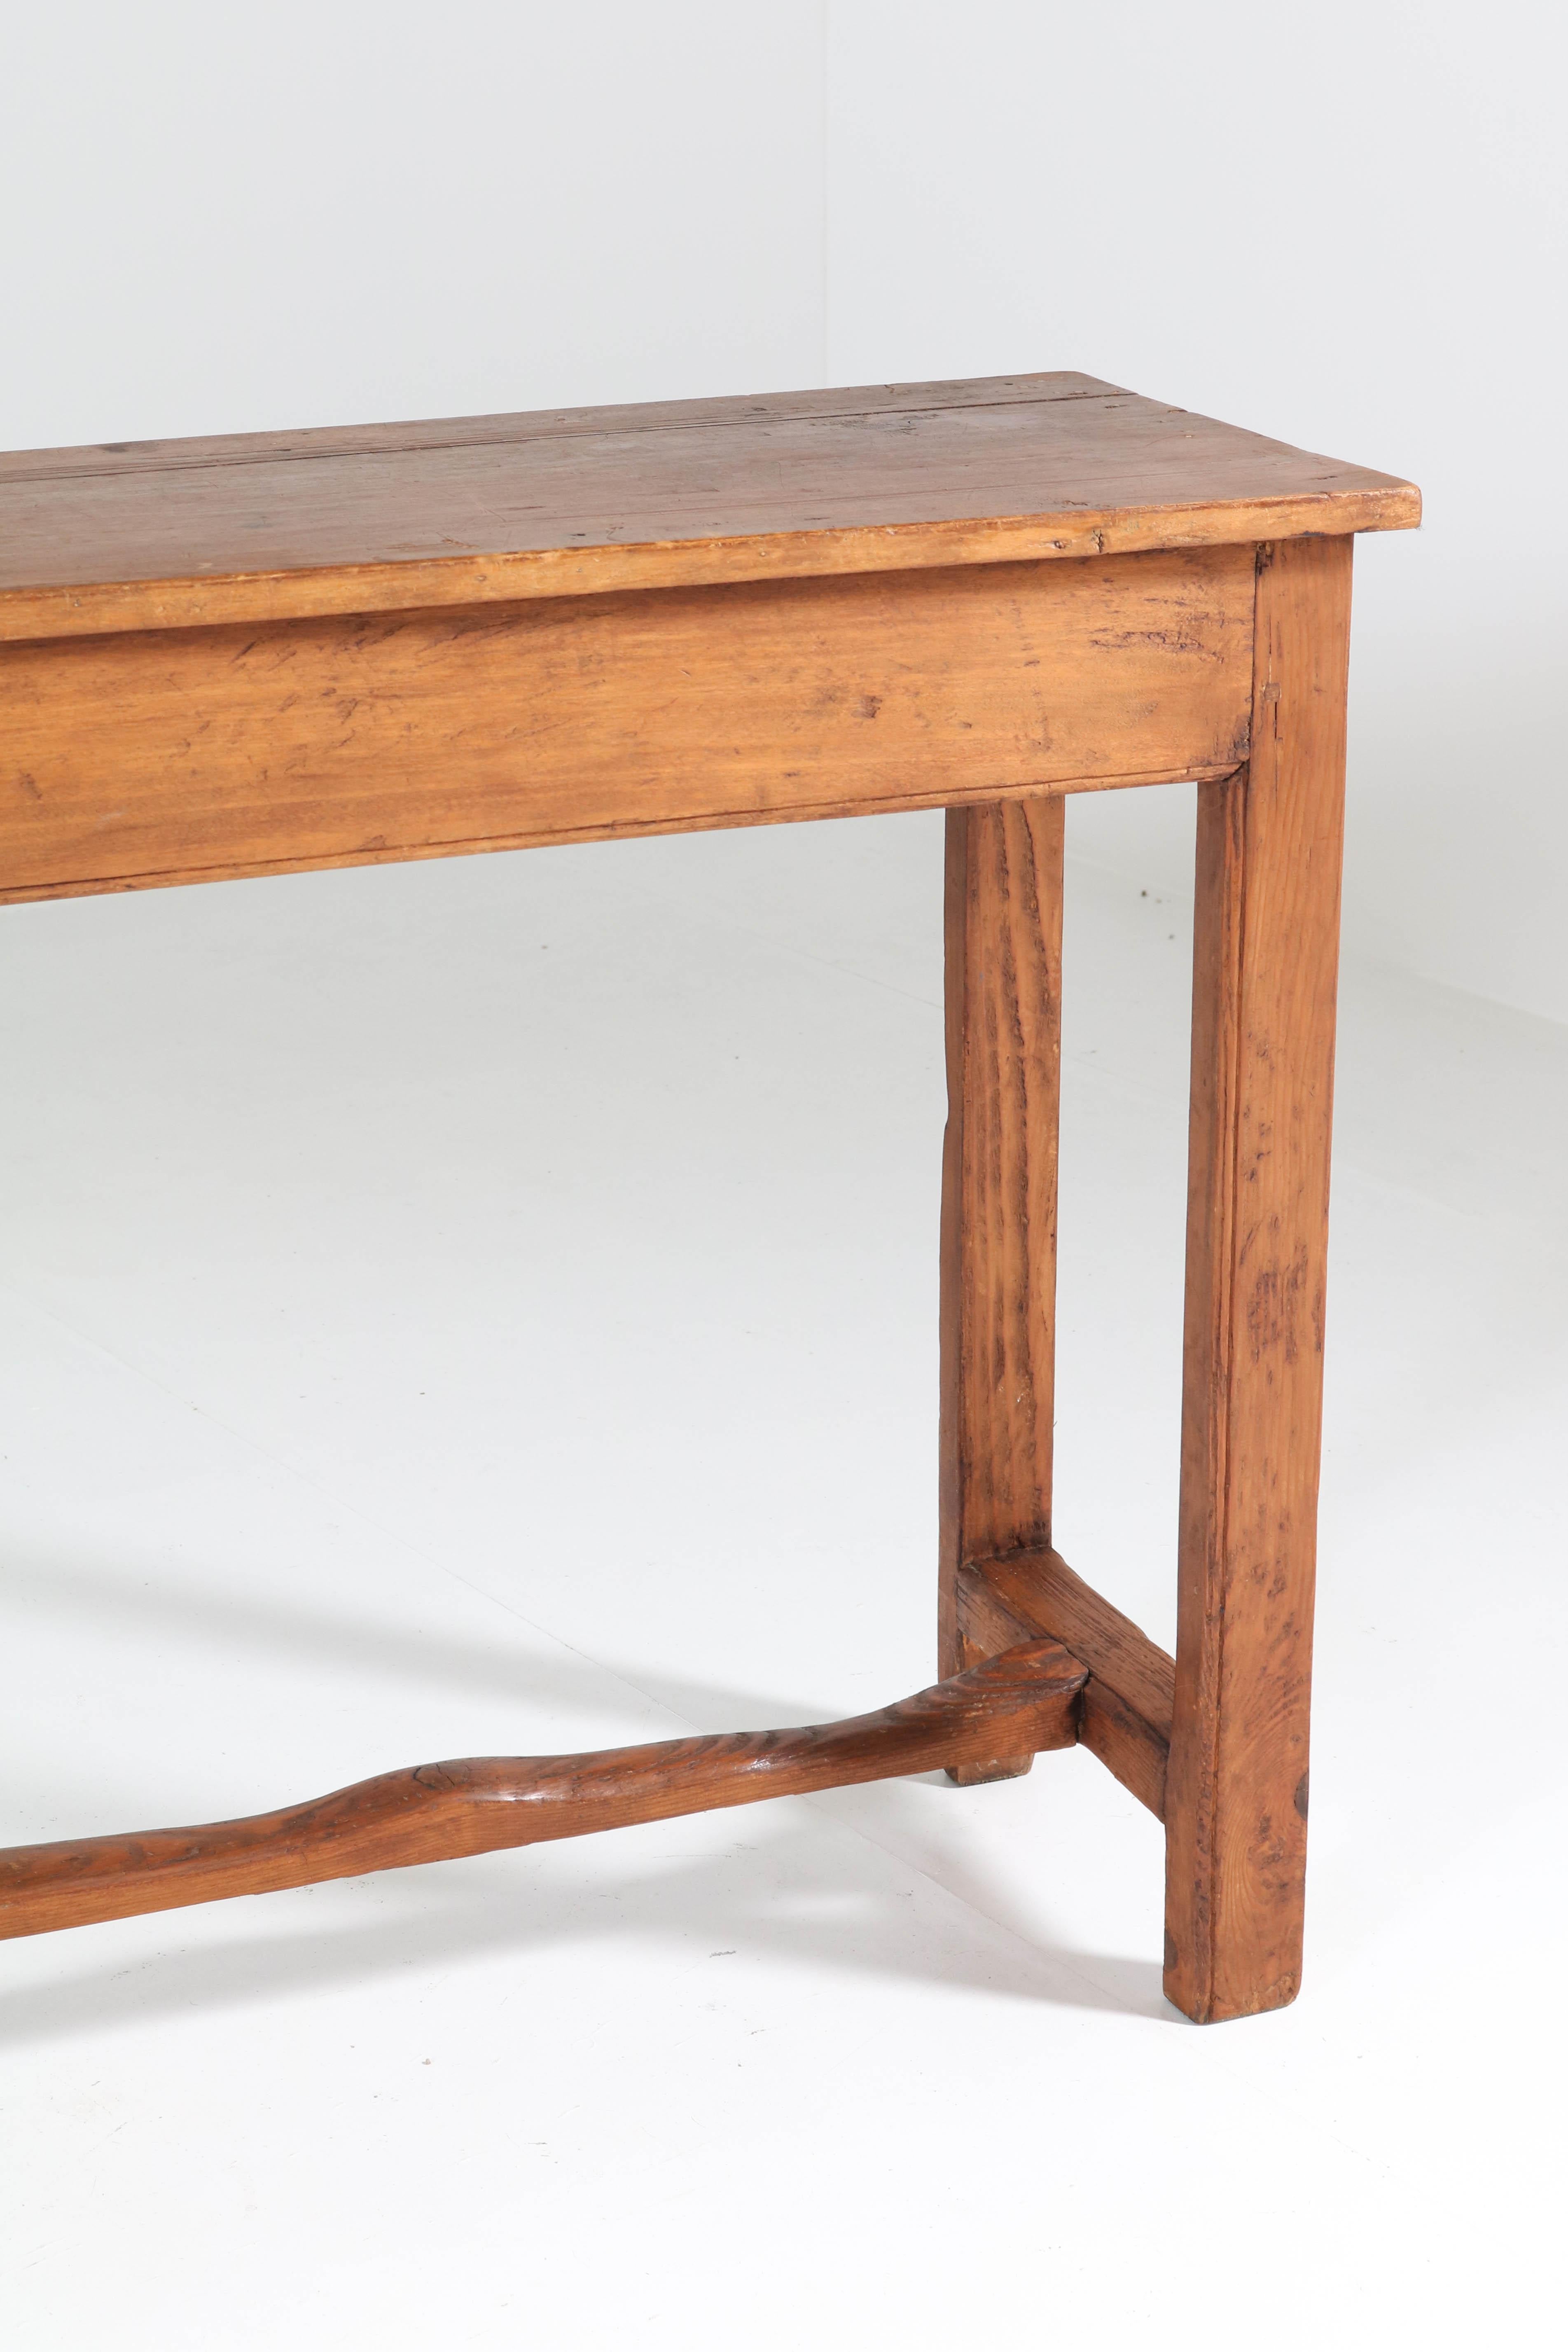 Stunning and rare French Provincial side-table or work table.
Large size and manufactured circa 1890.
Solid pine.
In good original condition with minor wear consistent with age and use,
preserving a beautiful patina.